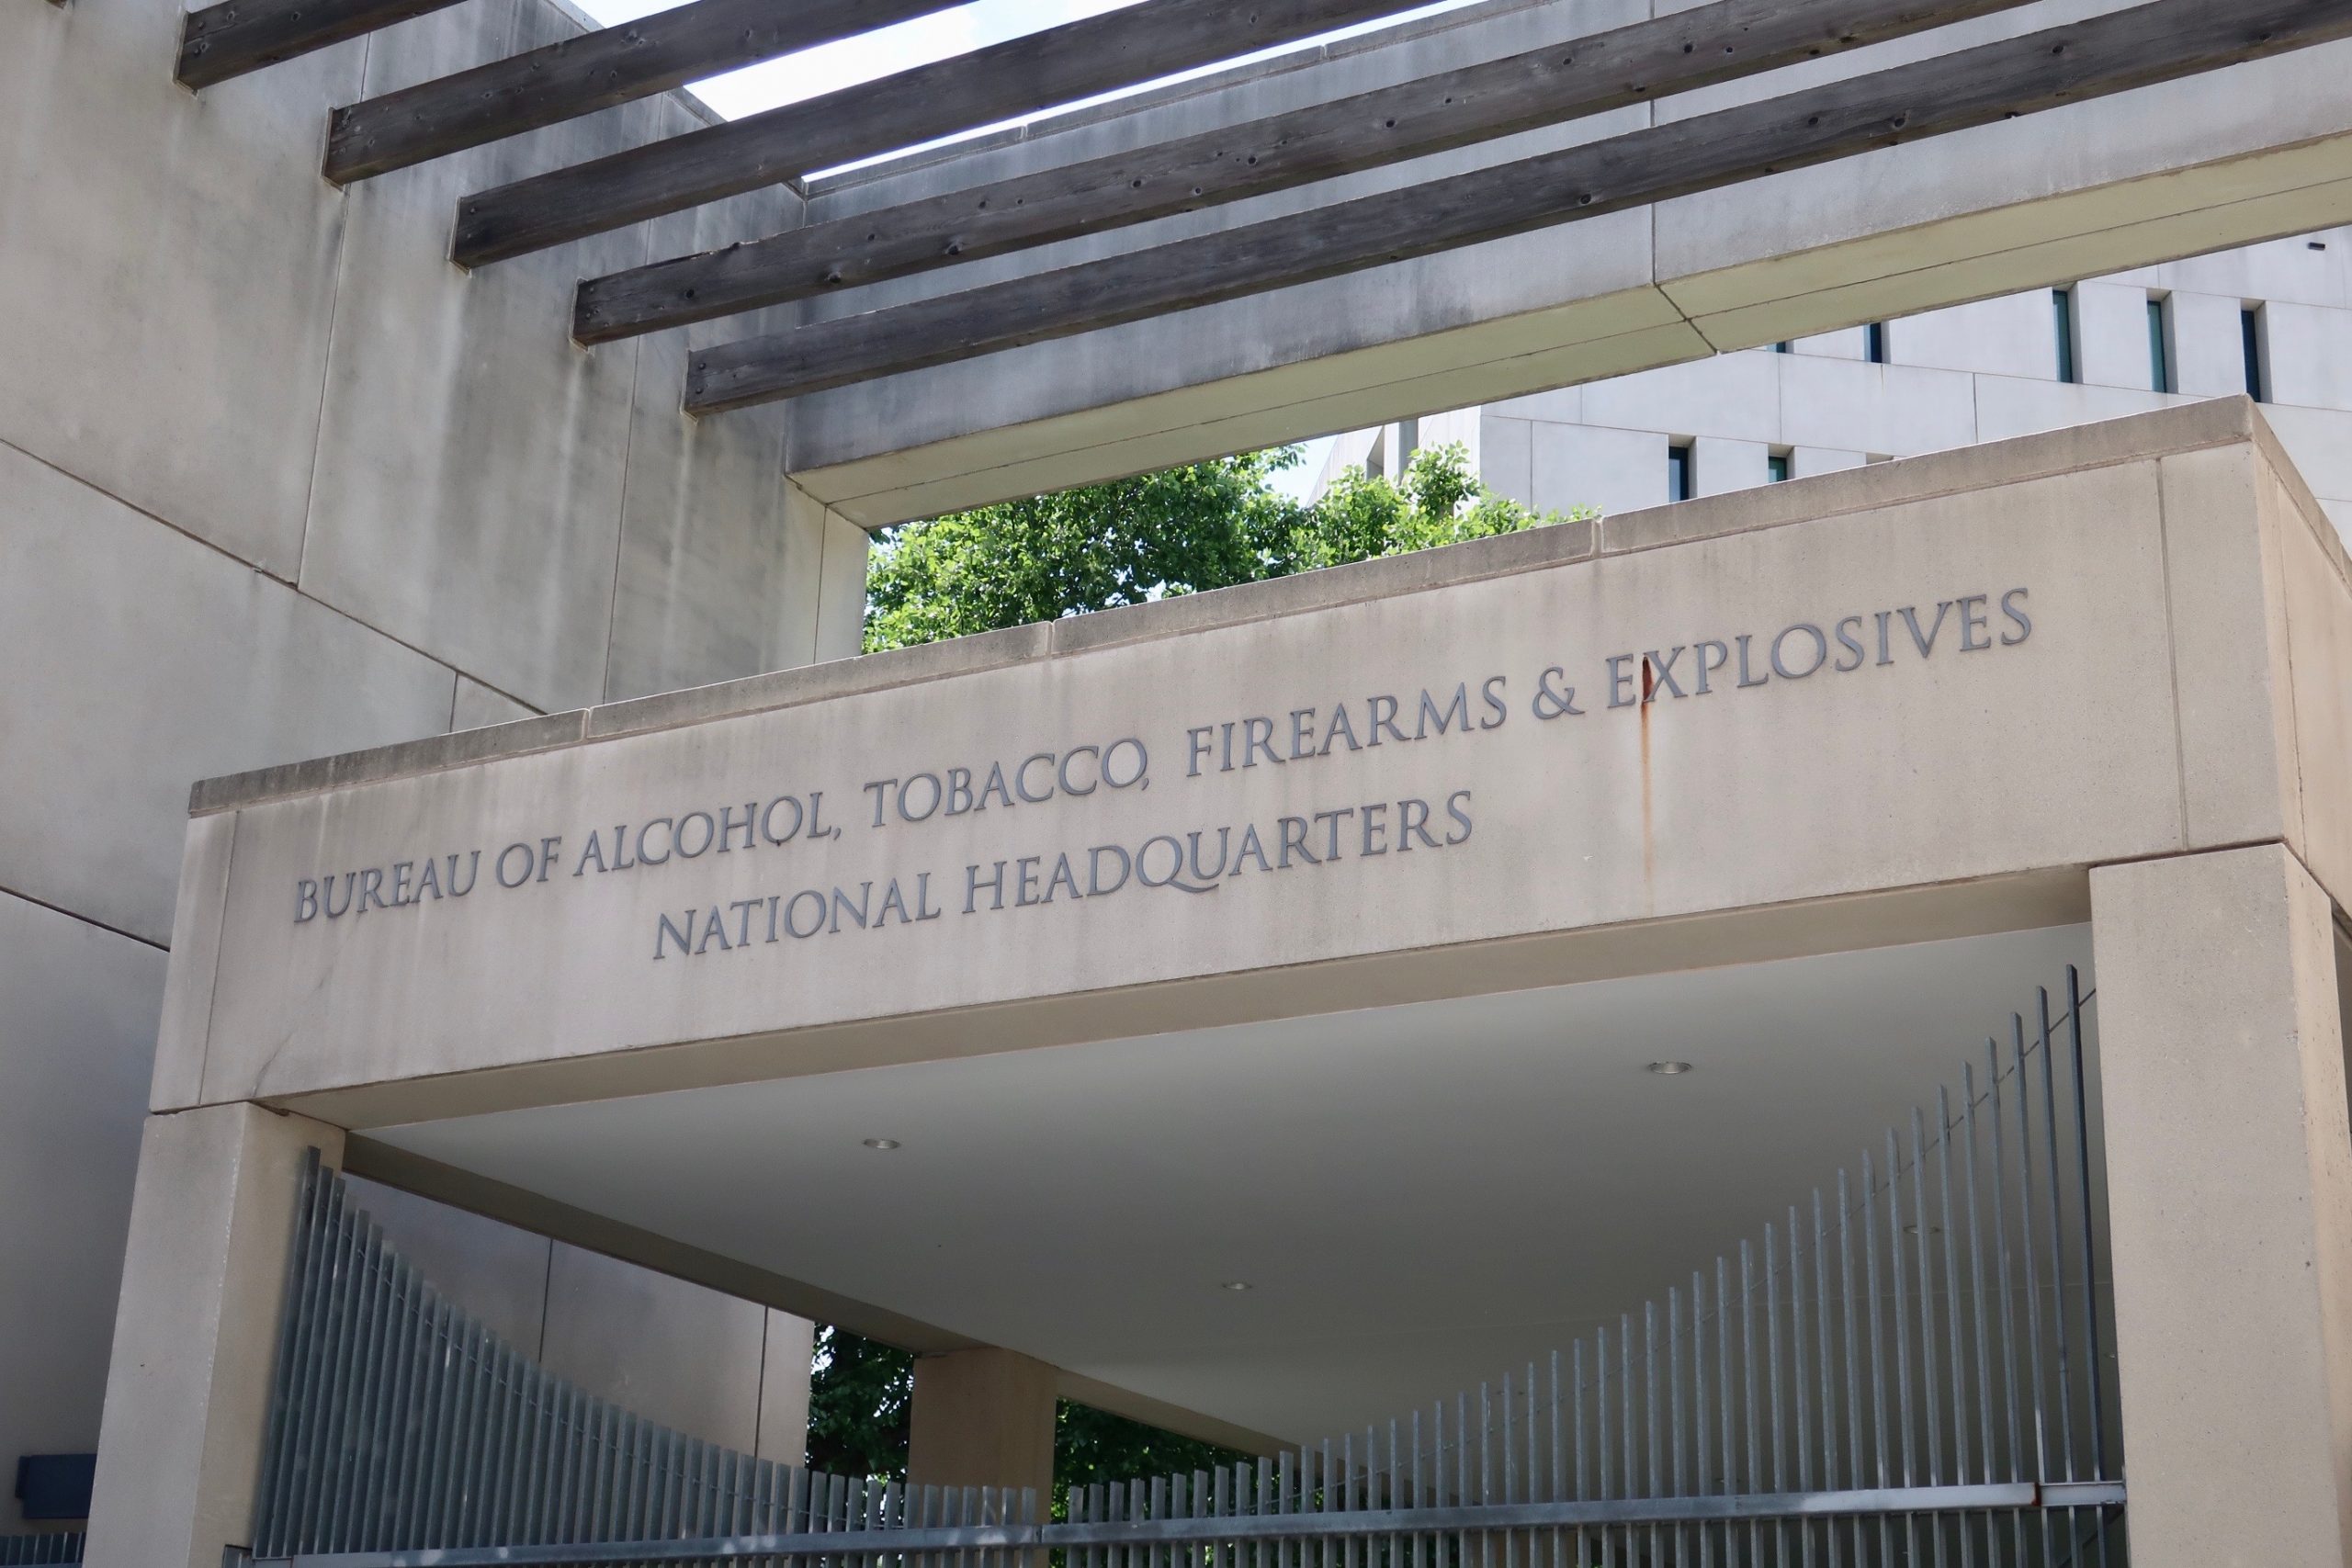 Cement building with Bureau of Alcohol, Tobacco, Firearms and Explosives sign